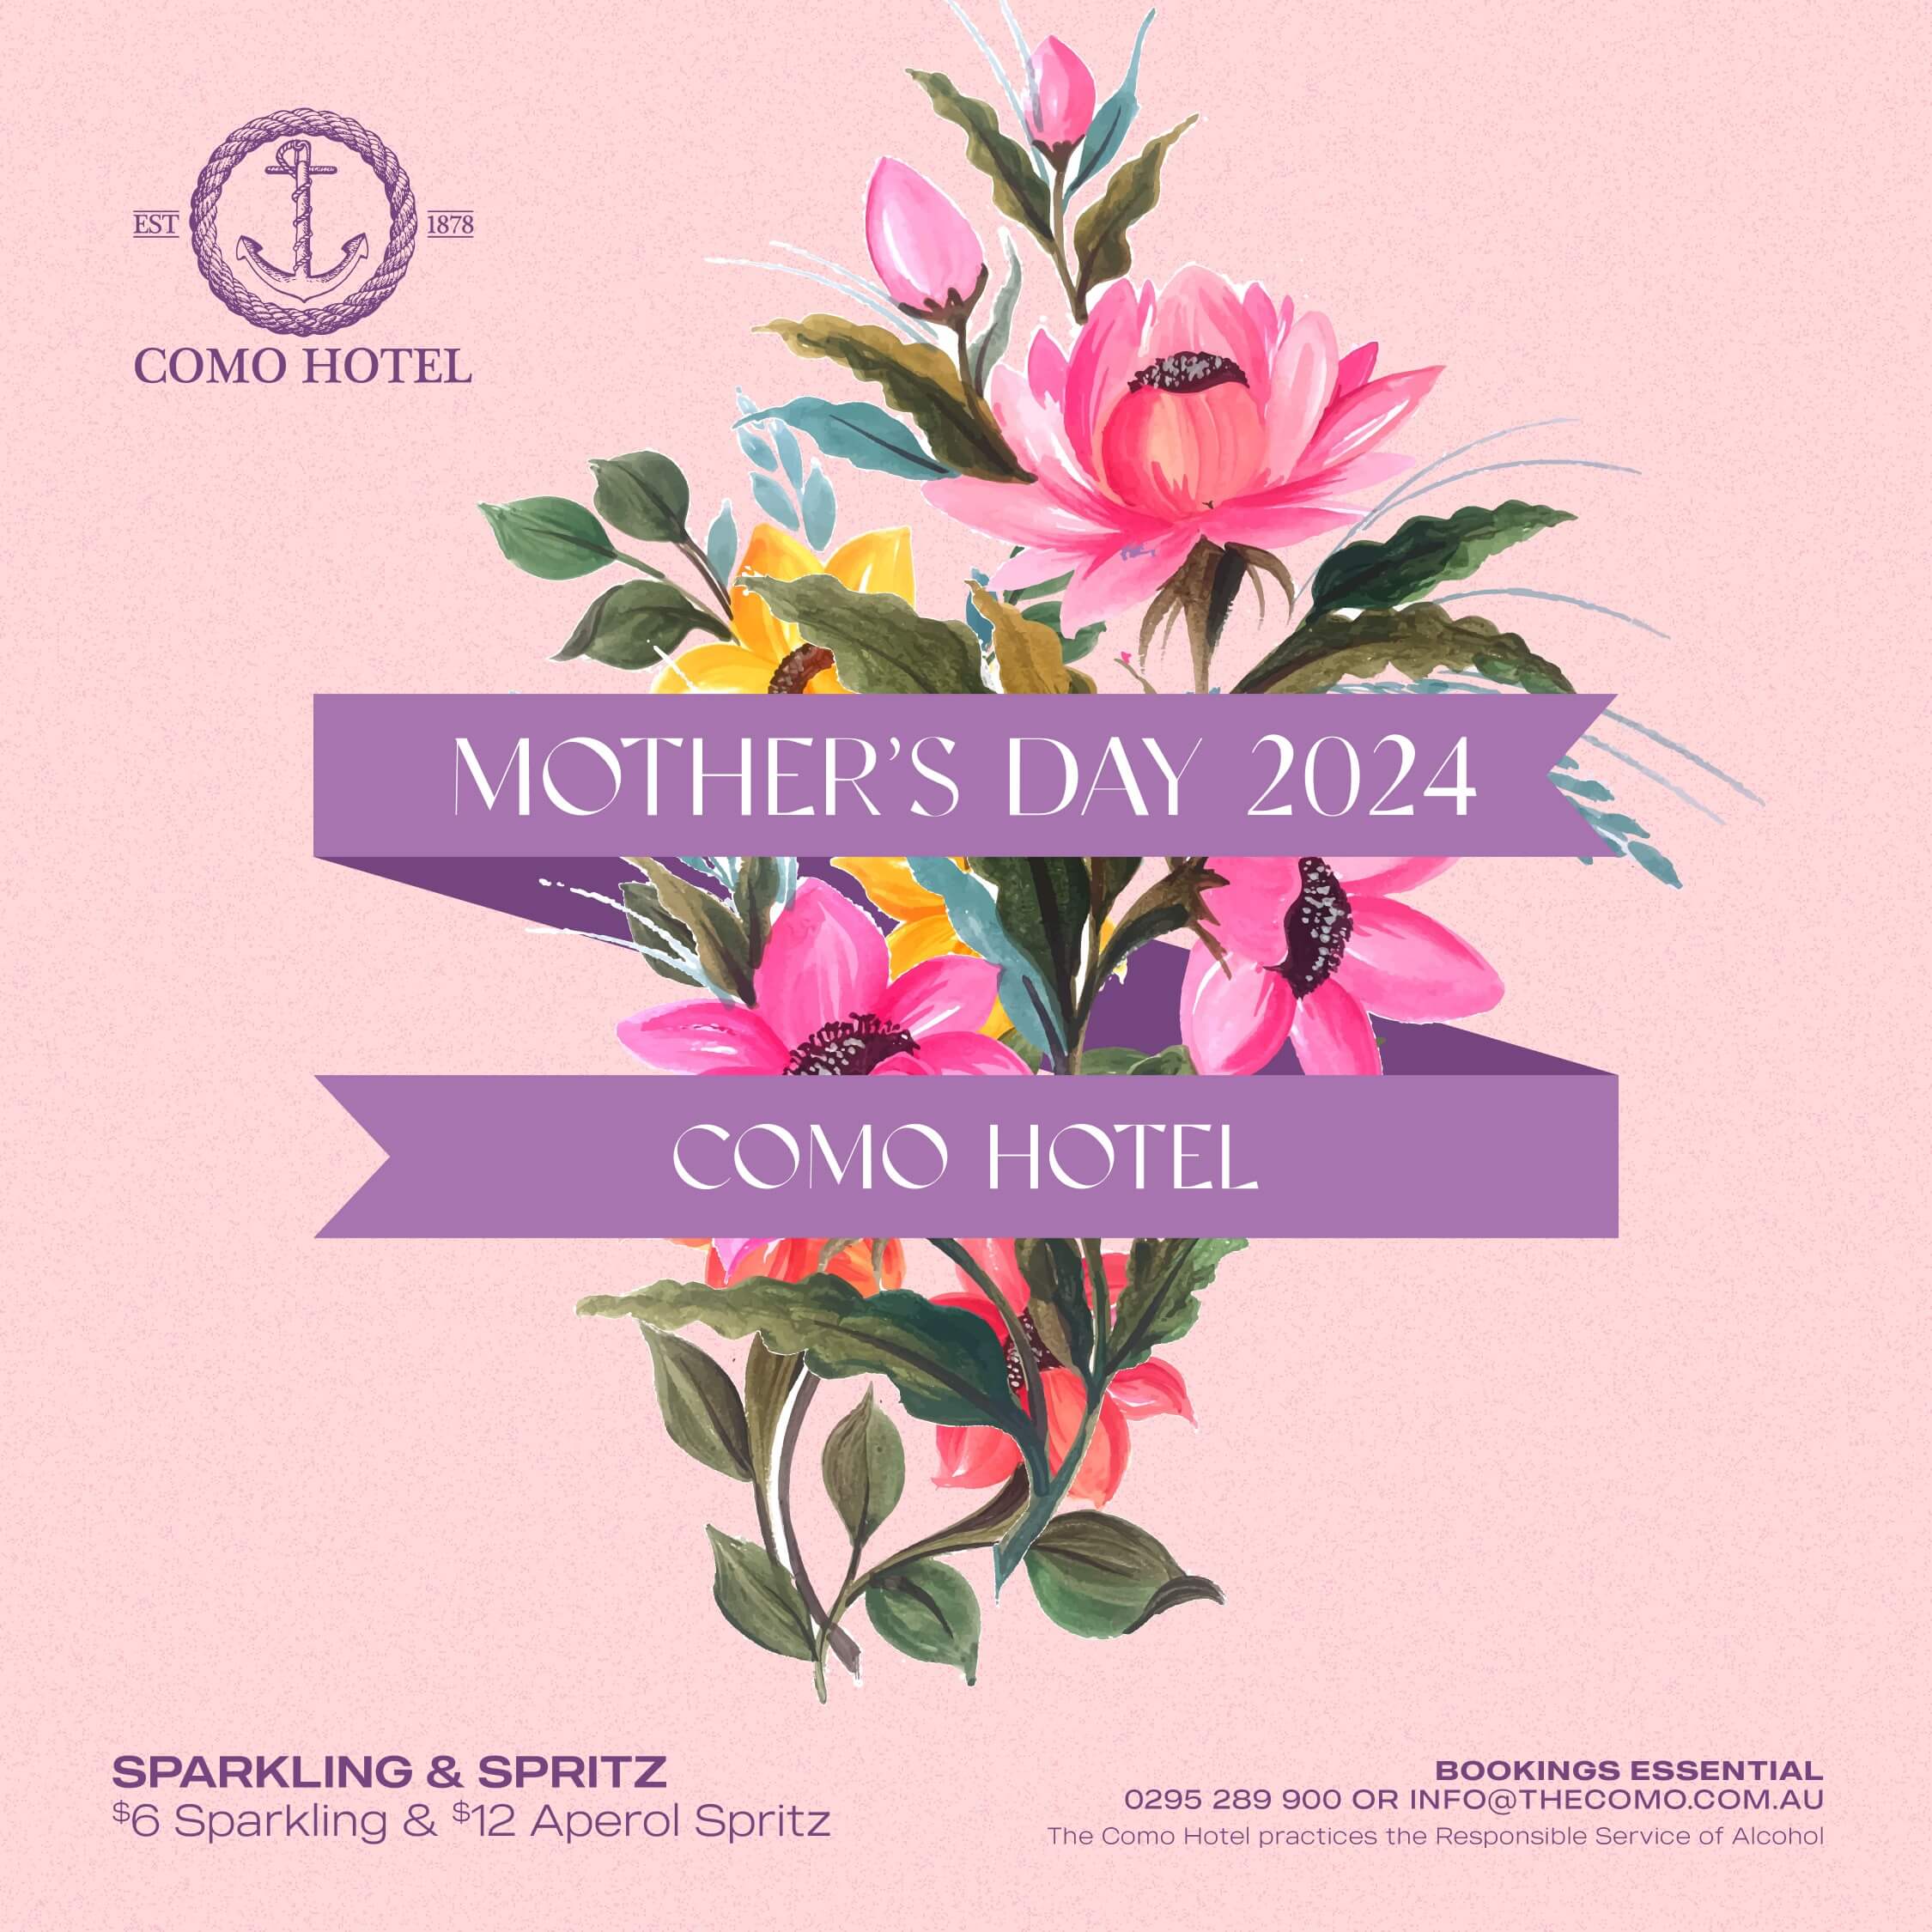 Mother’s Day at Como